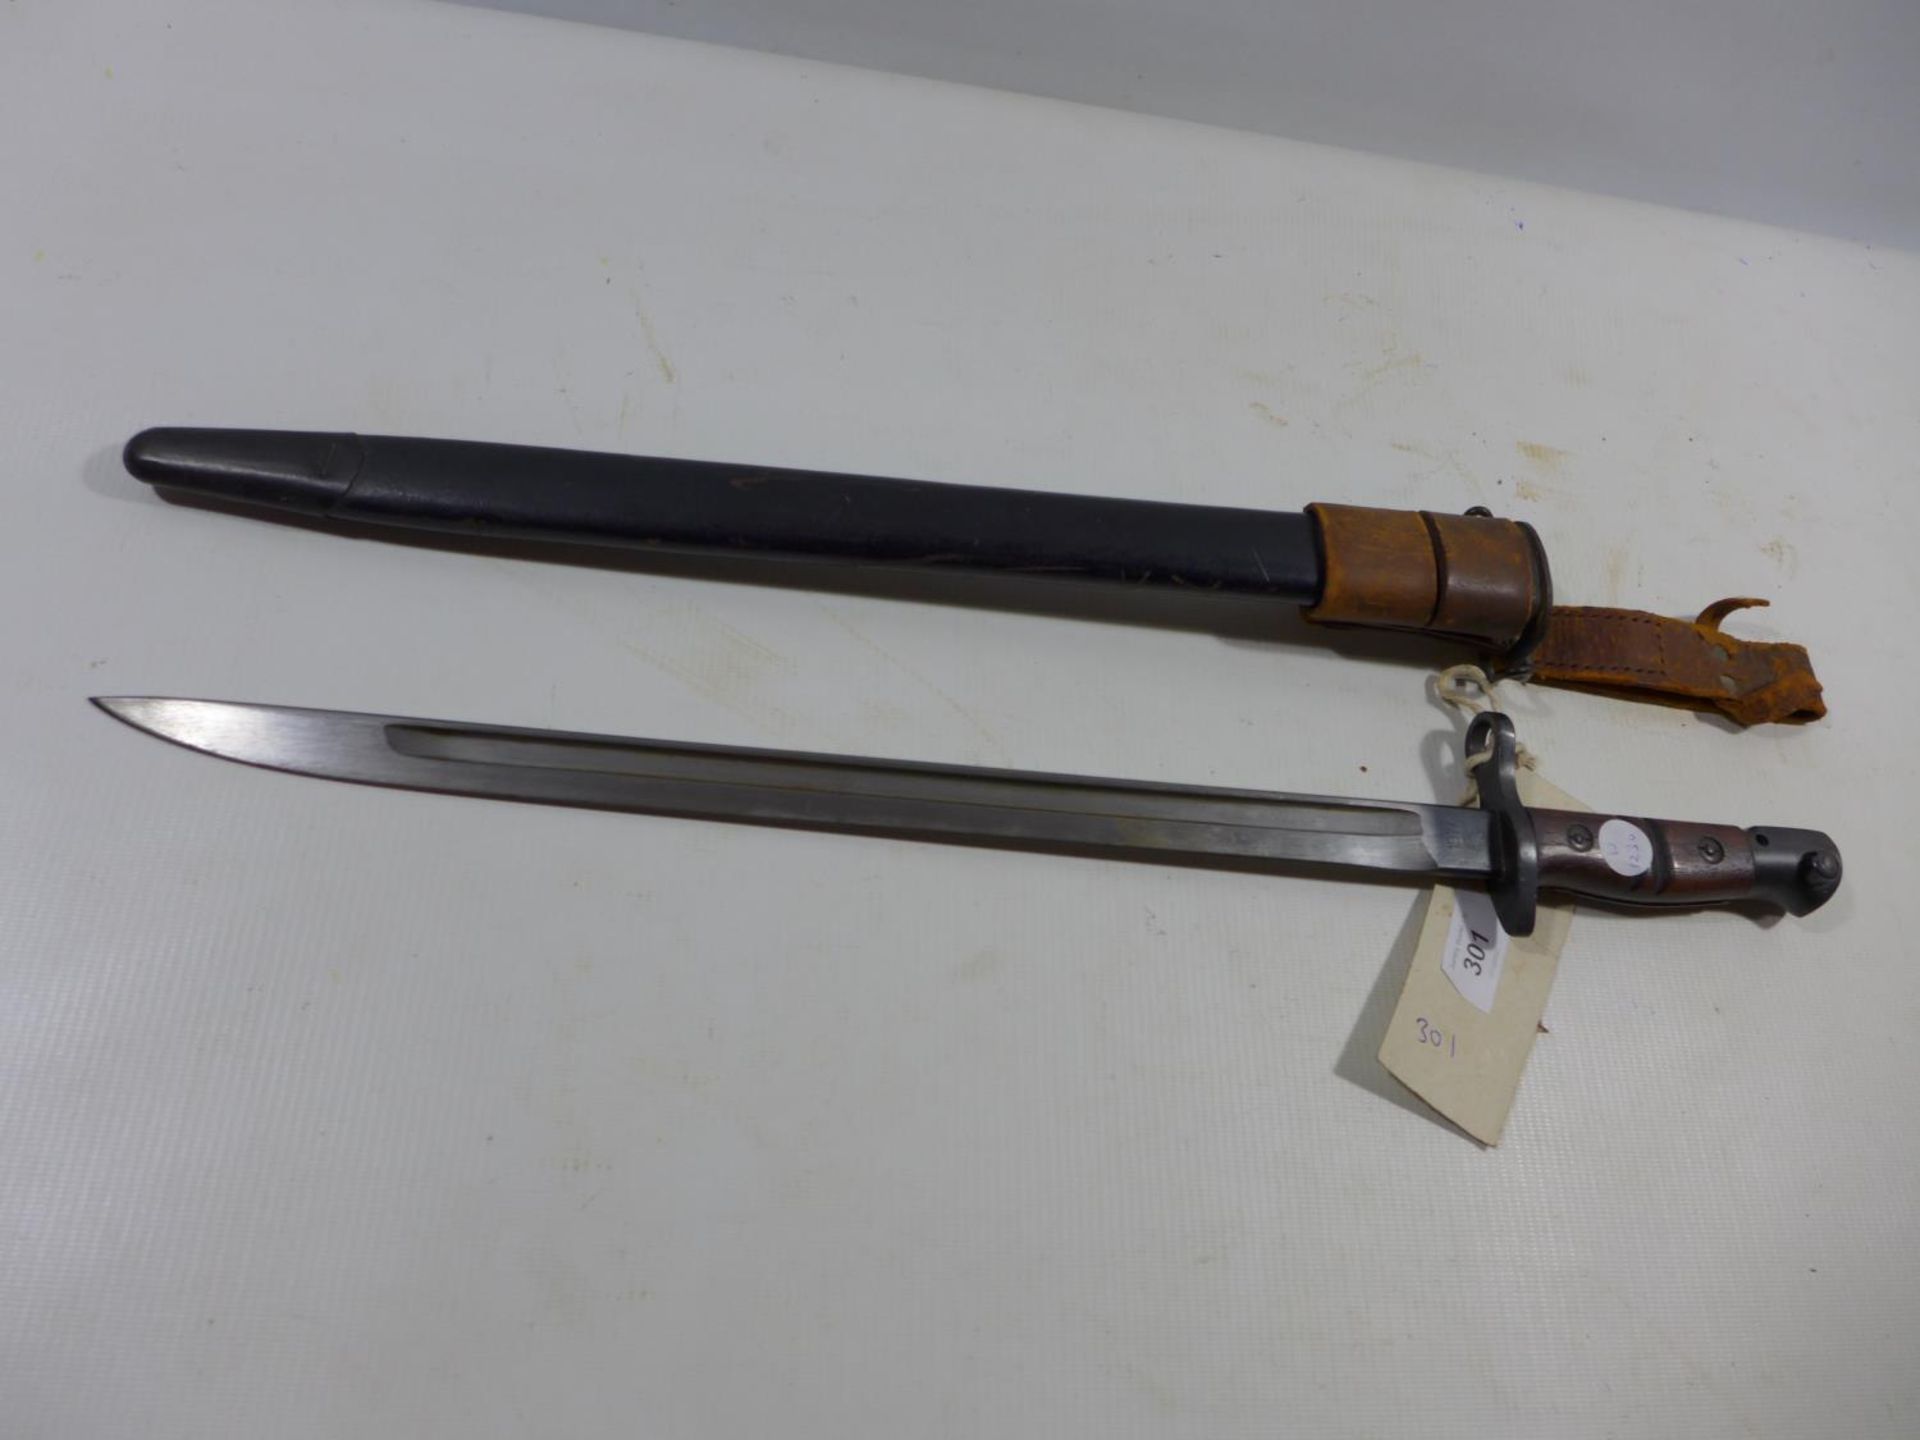 A WORLD WAR I UNITED STATES REMINGTON BAYONET AND SCABBARD, 43CM BLADE, DATED 1917